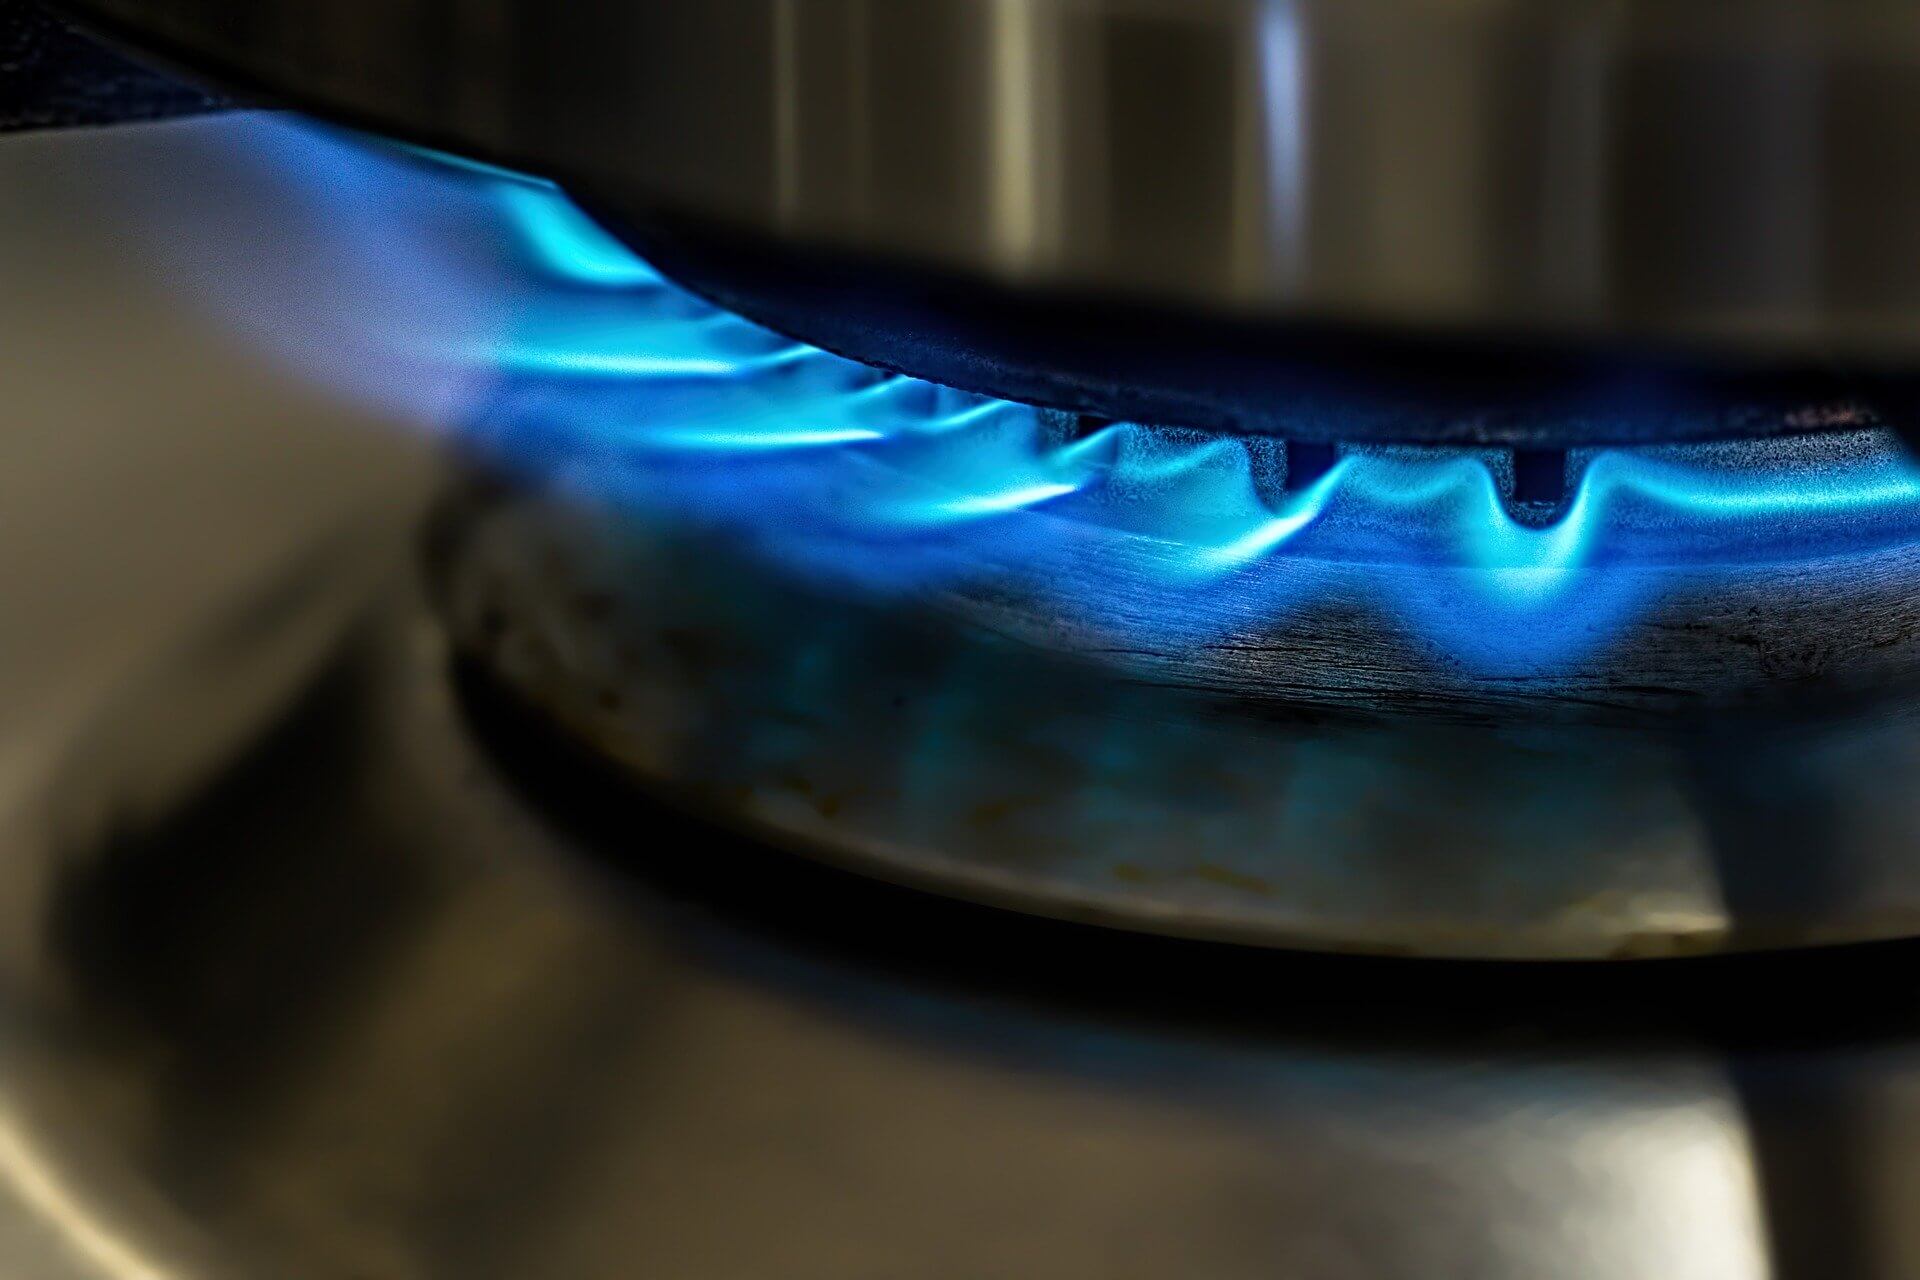 A close up of a gas burner on a stove top.